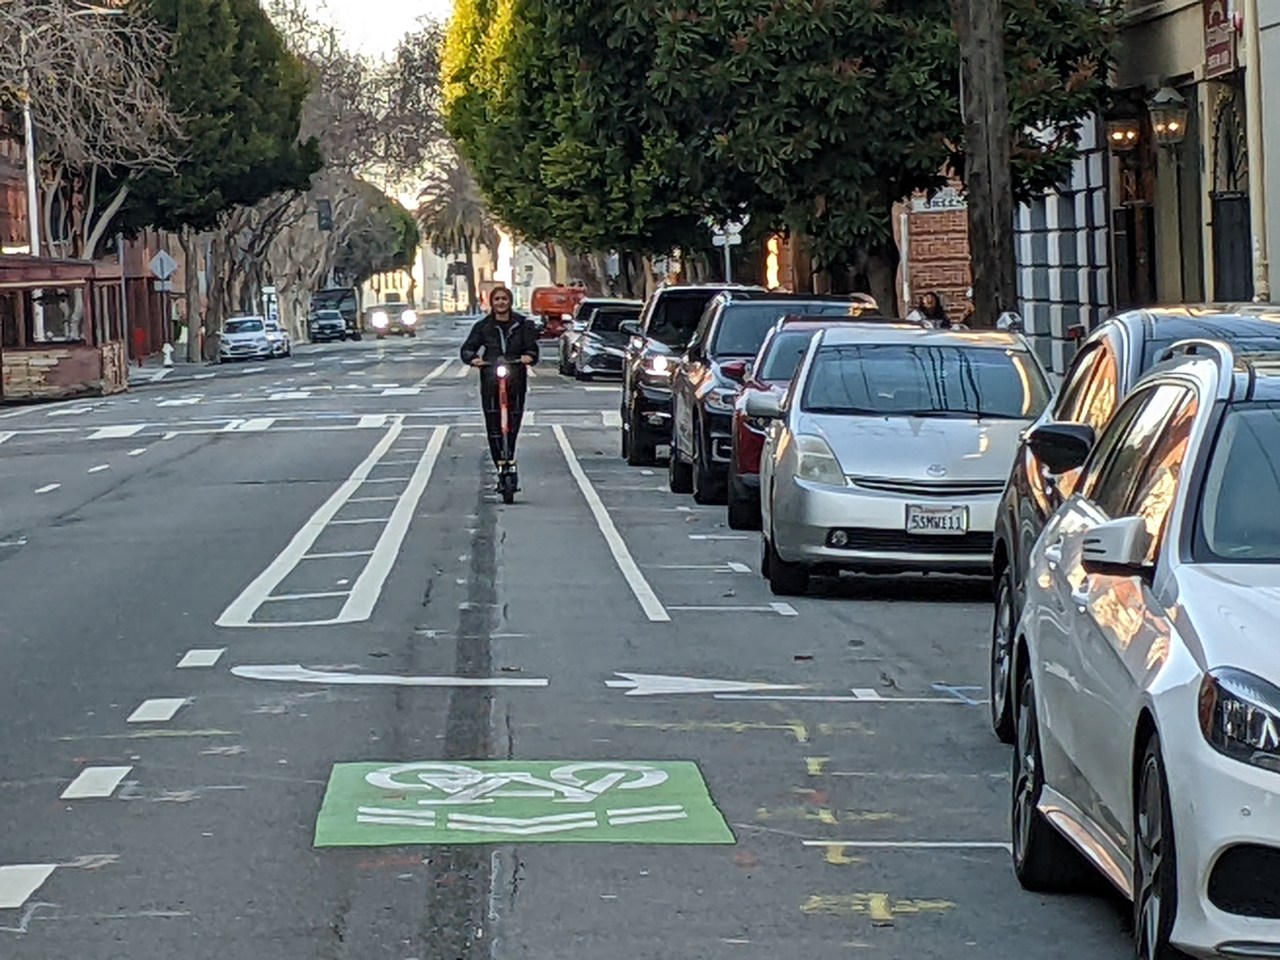 Farther down the street, a striped bike lane in the door zone on the wrong side